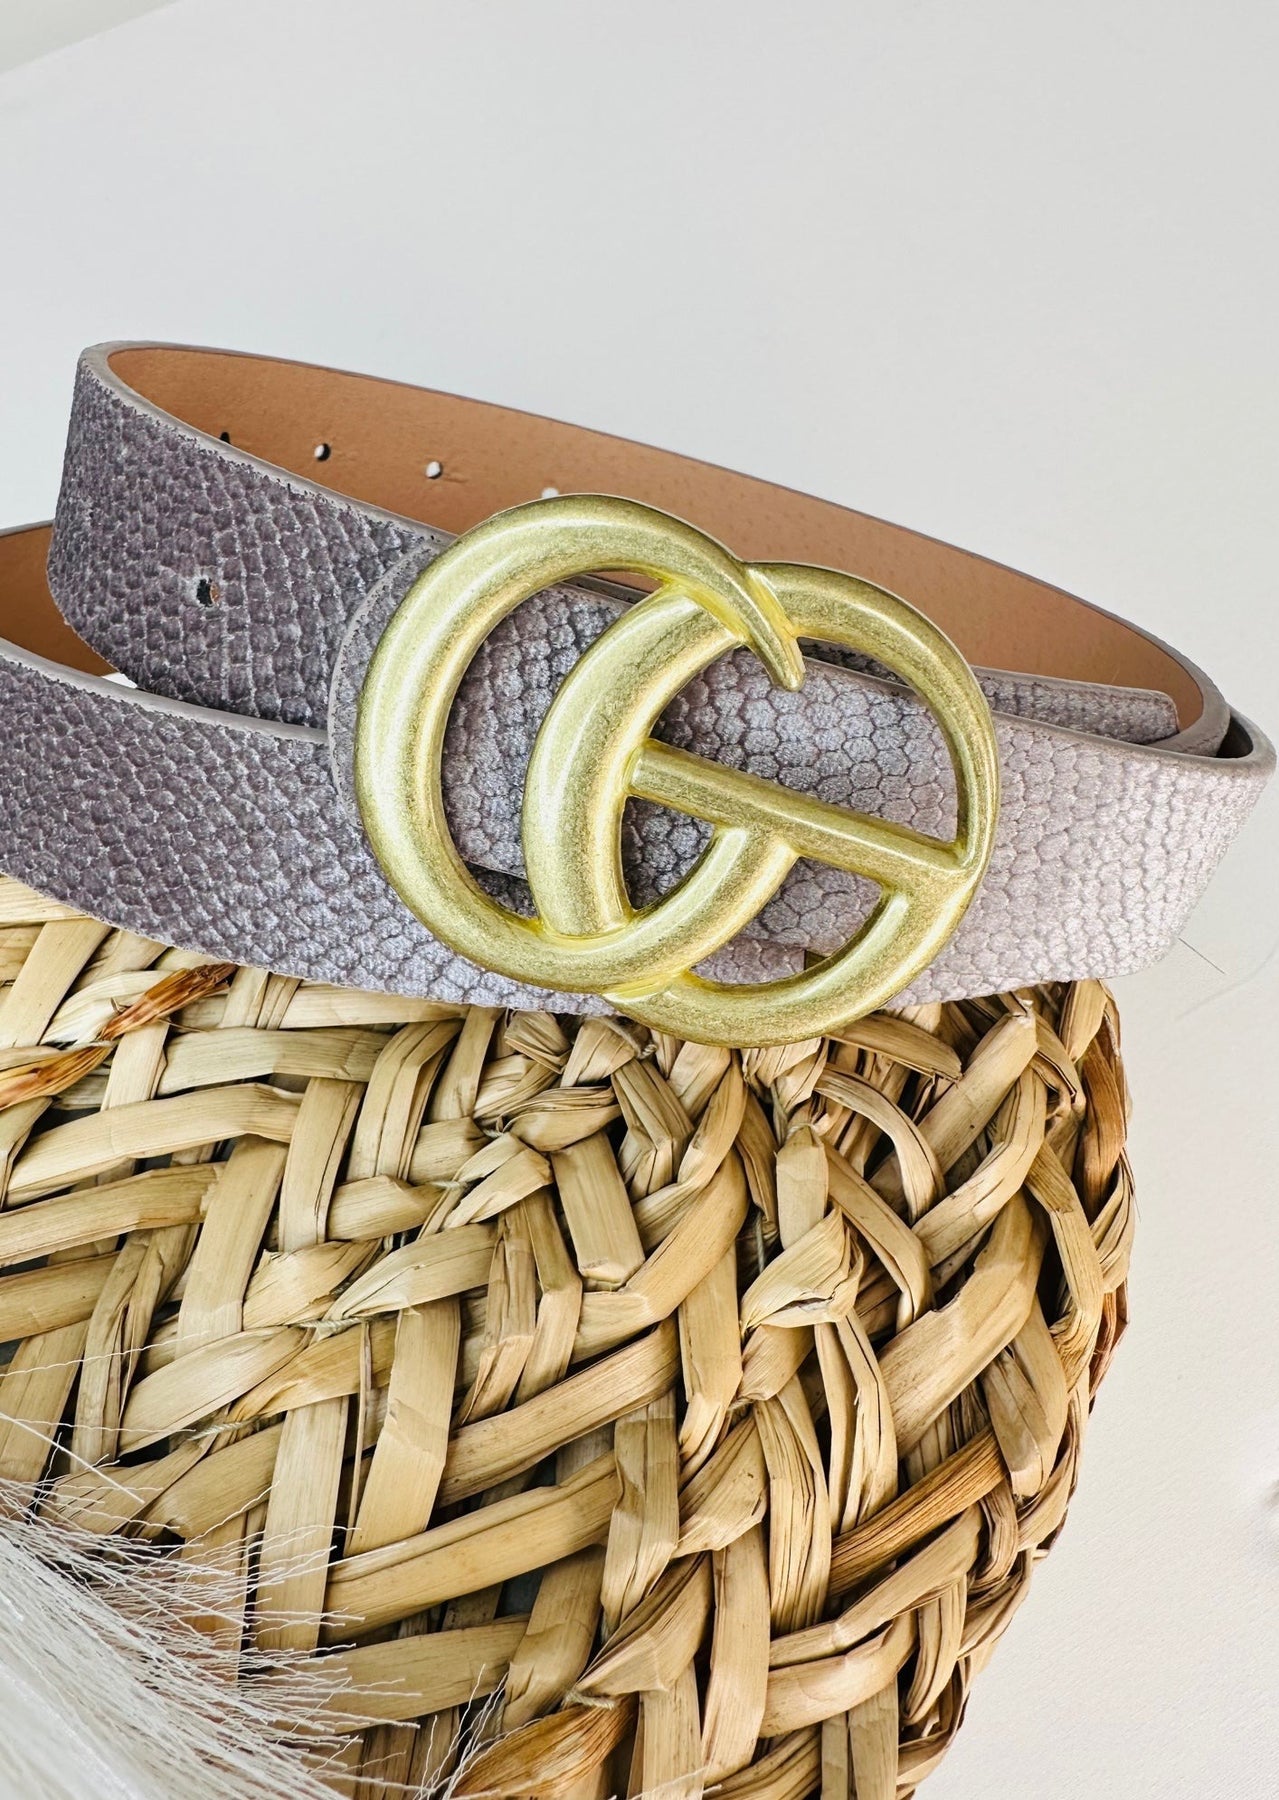 Tia B GO Belt - Brushed with Worn Gold Buckle | Tia B Boutique